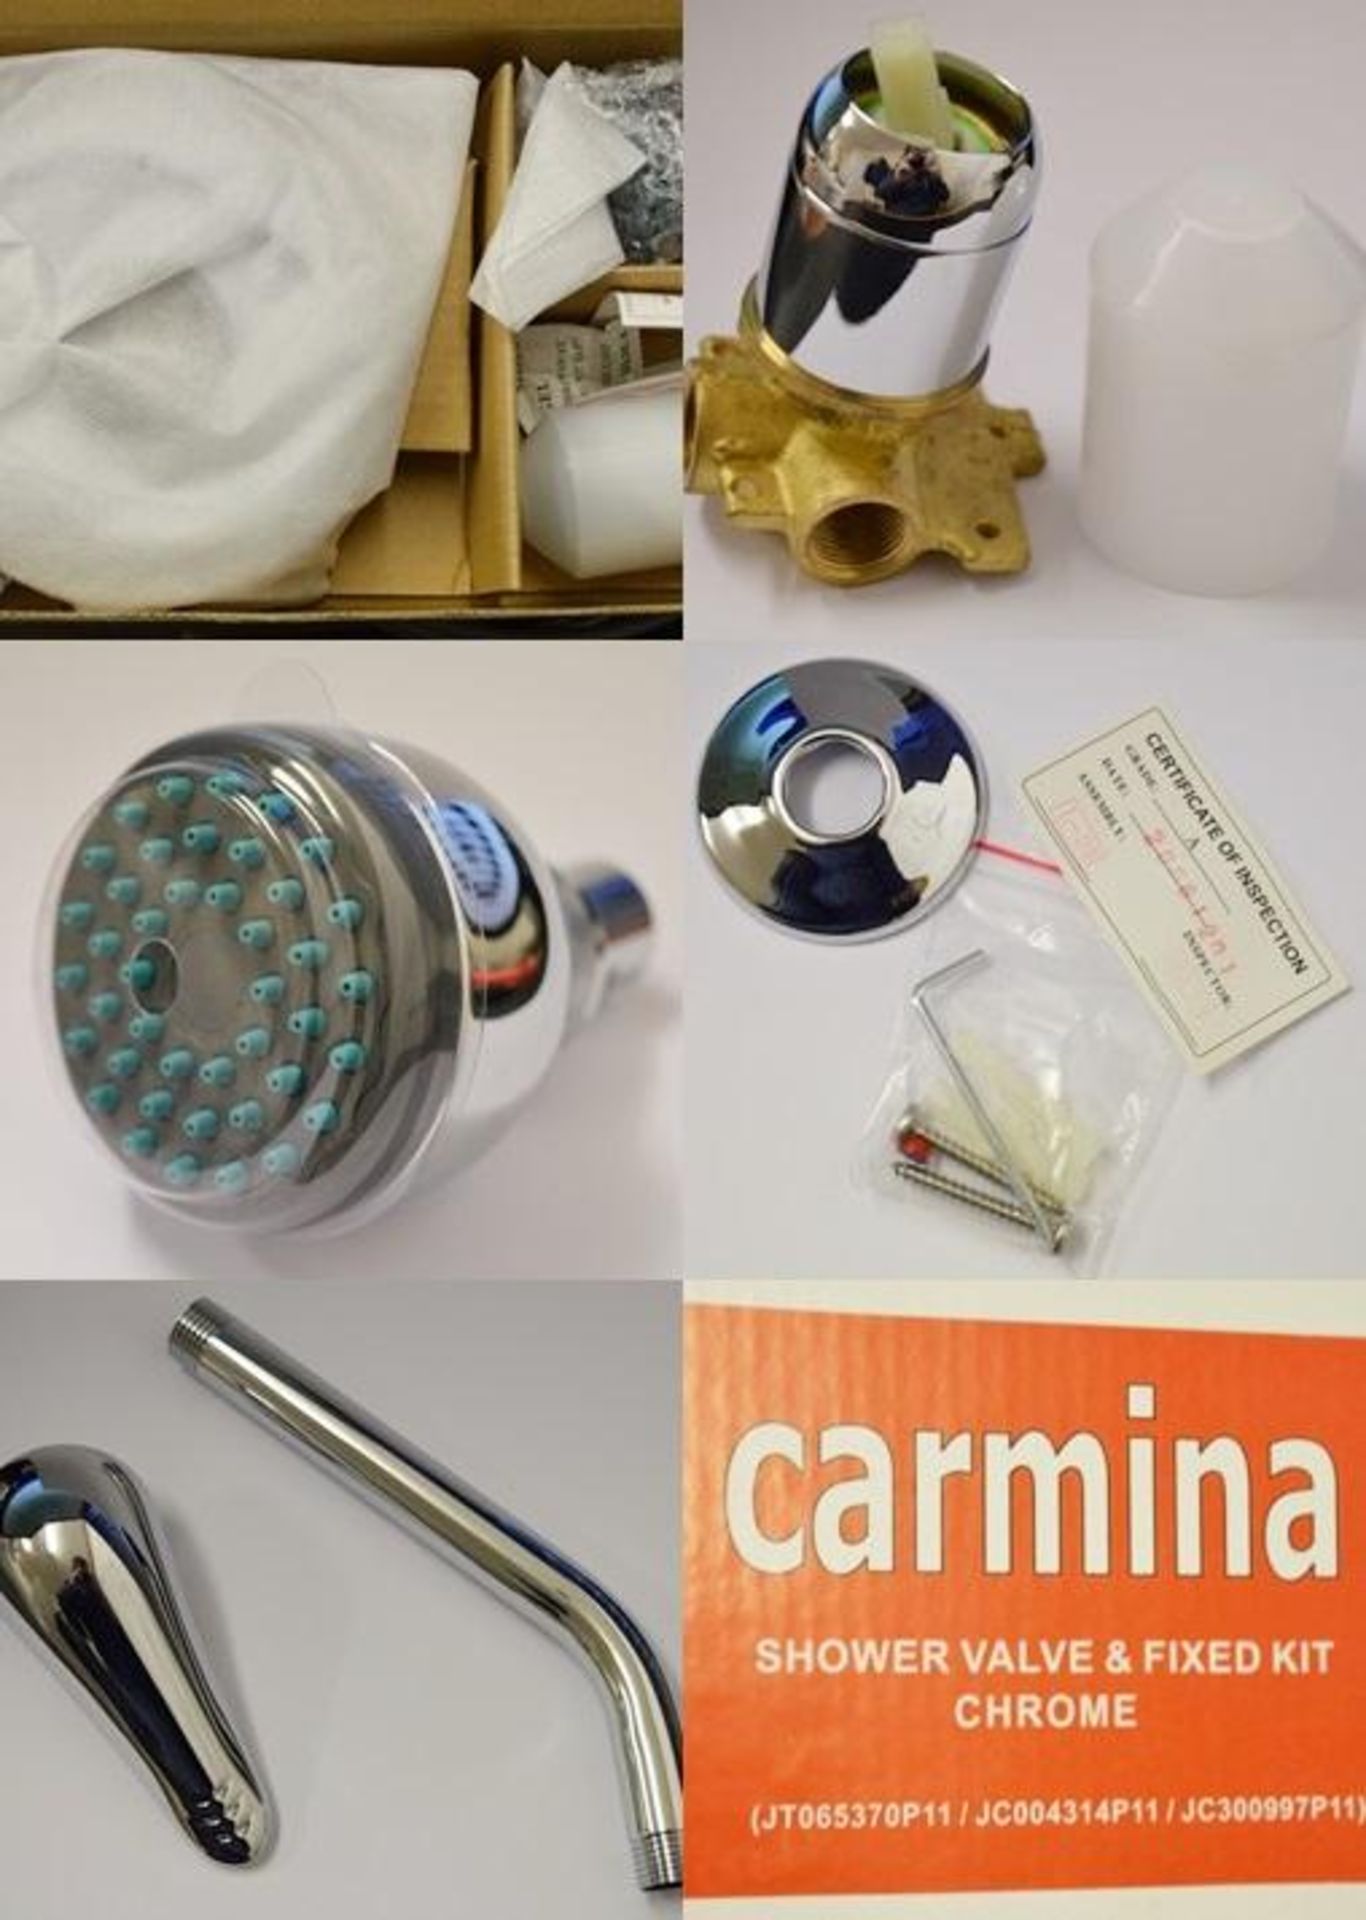 1 x Carmina Shower Valve Kit - Contains Chrome Shower Head, Fixed Arm and Manual Control - Brass - Image 6 of 7